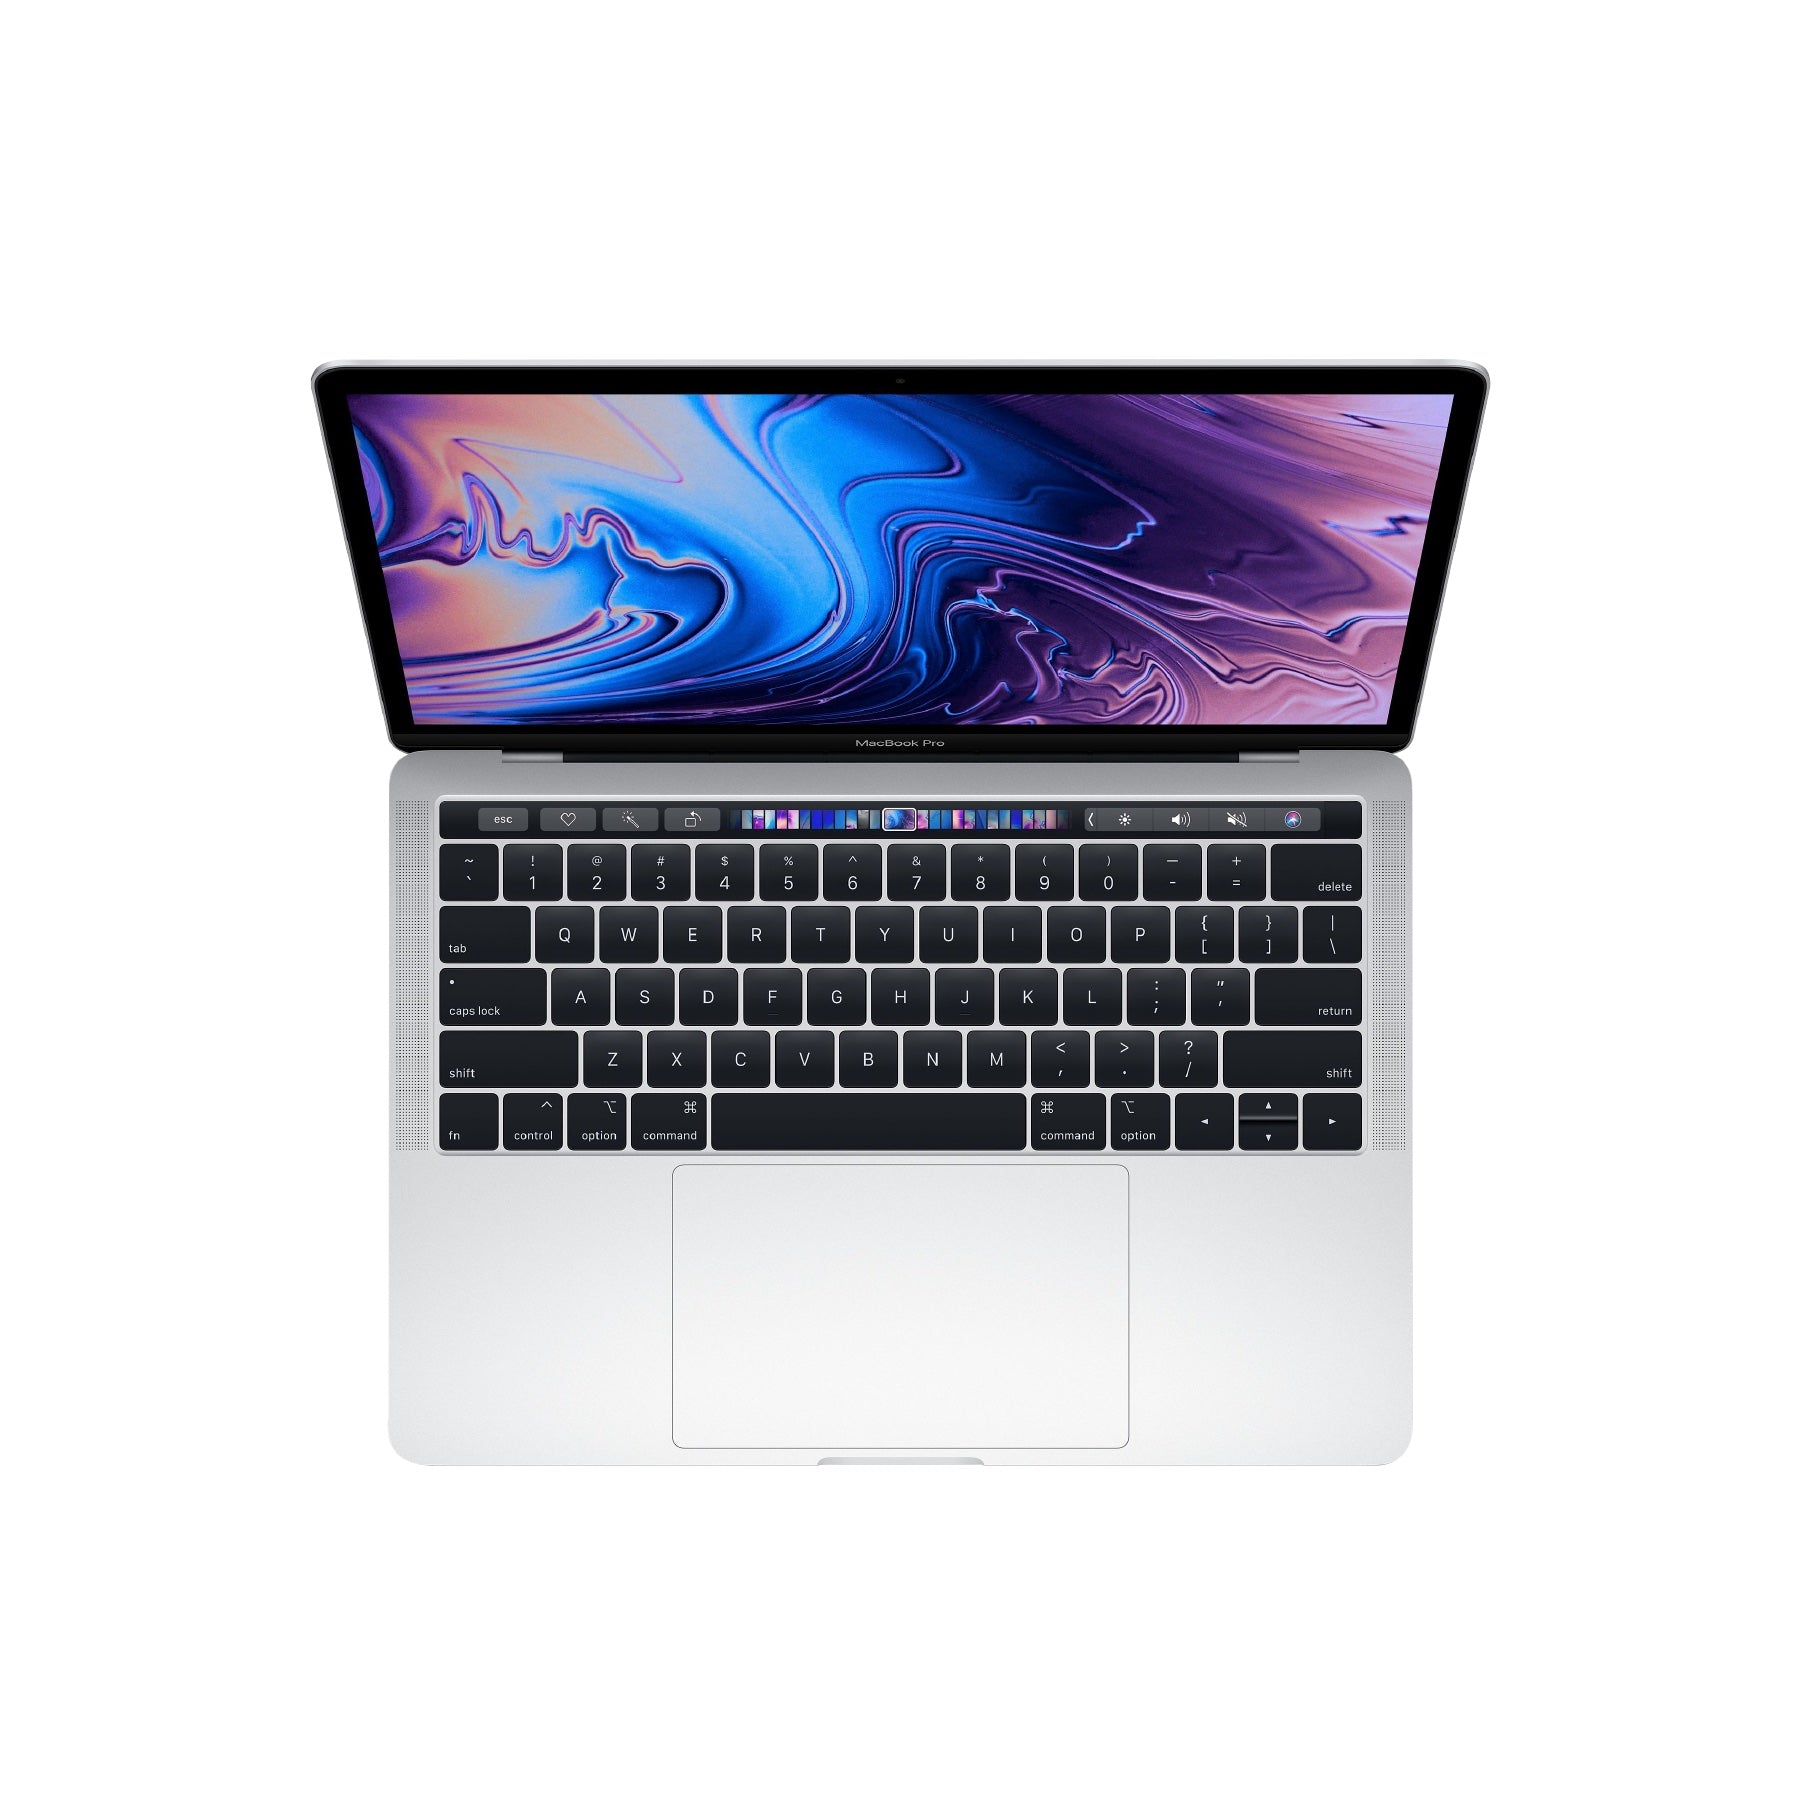 MacBook Pro (13-inch, 2020, Four Thunderbolt 3 ports) 2.0GHz, Intel Core i5 512GB - Silver (Best) - iStore Pre-owned